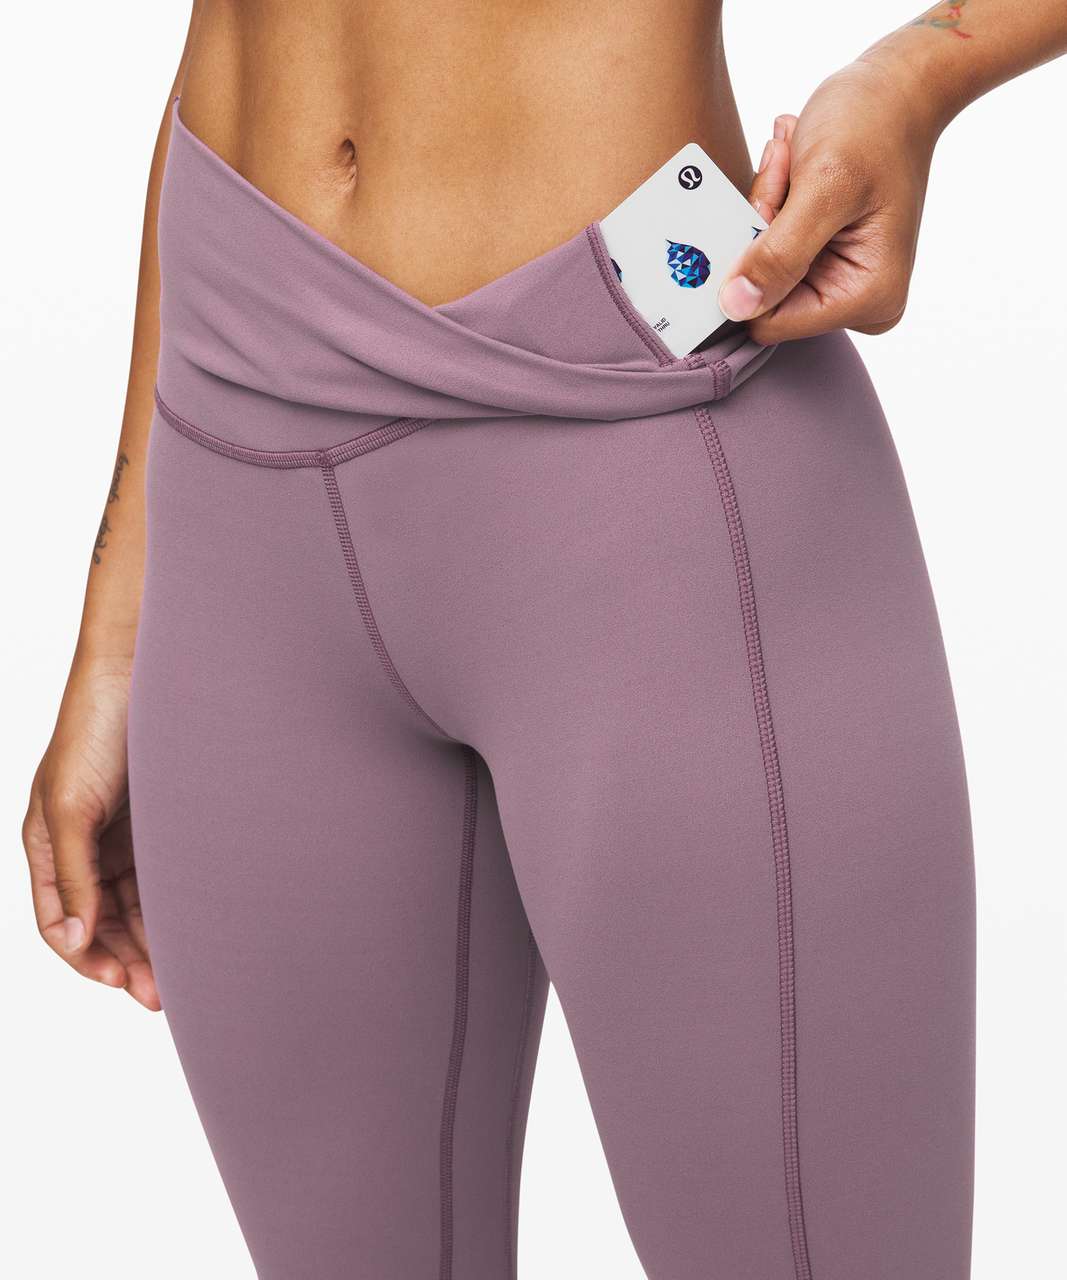 Lululemon Align Pant 25" *Petal - Frosted Mulberry